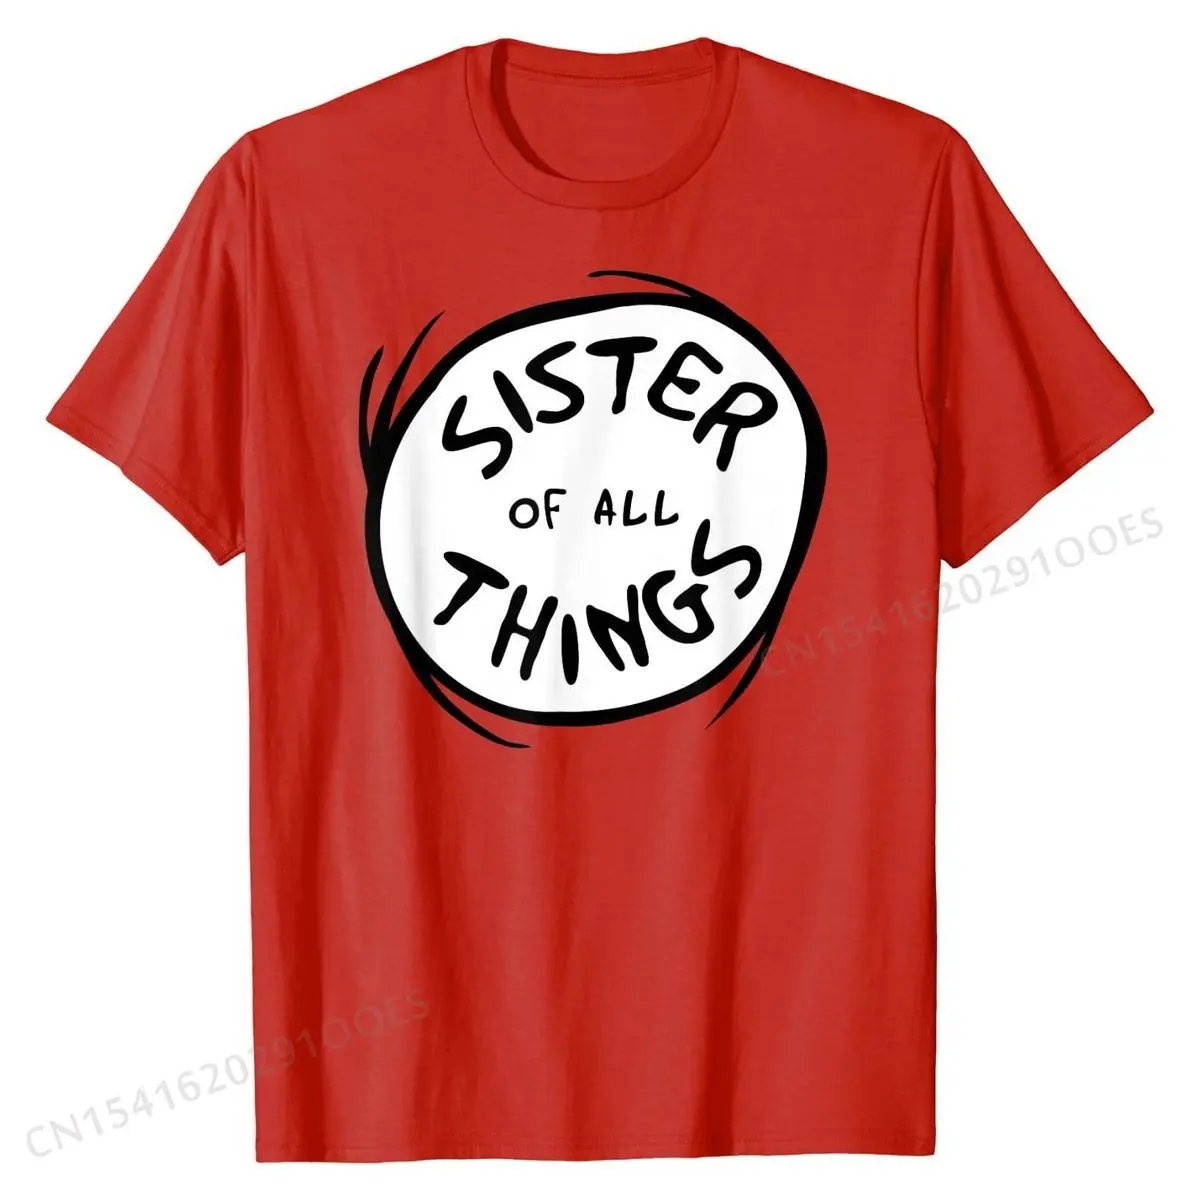 Sister of all Things Emblem RED T-shirt Oversized Men Tshirts Cotton Tops & Tees Design